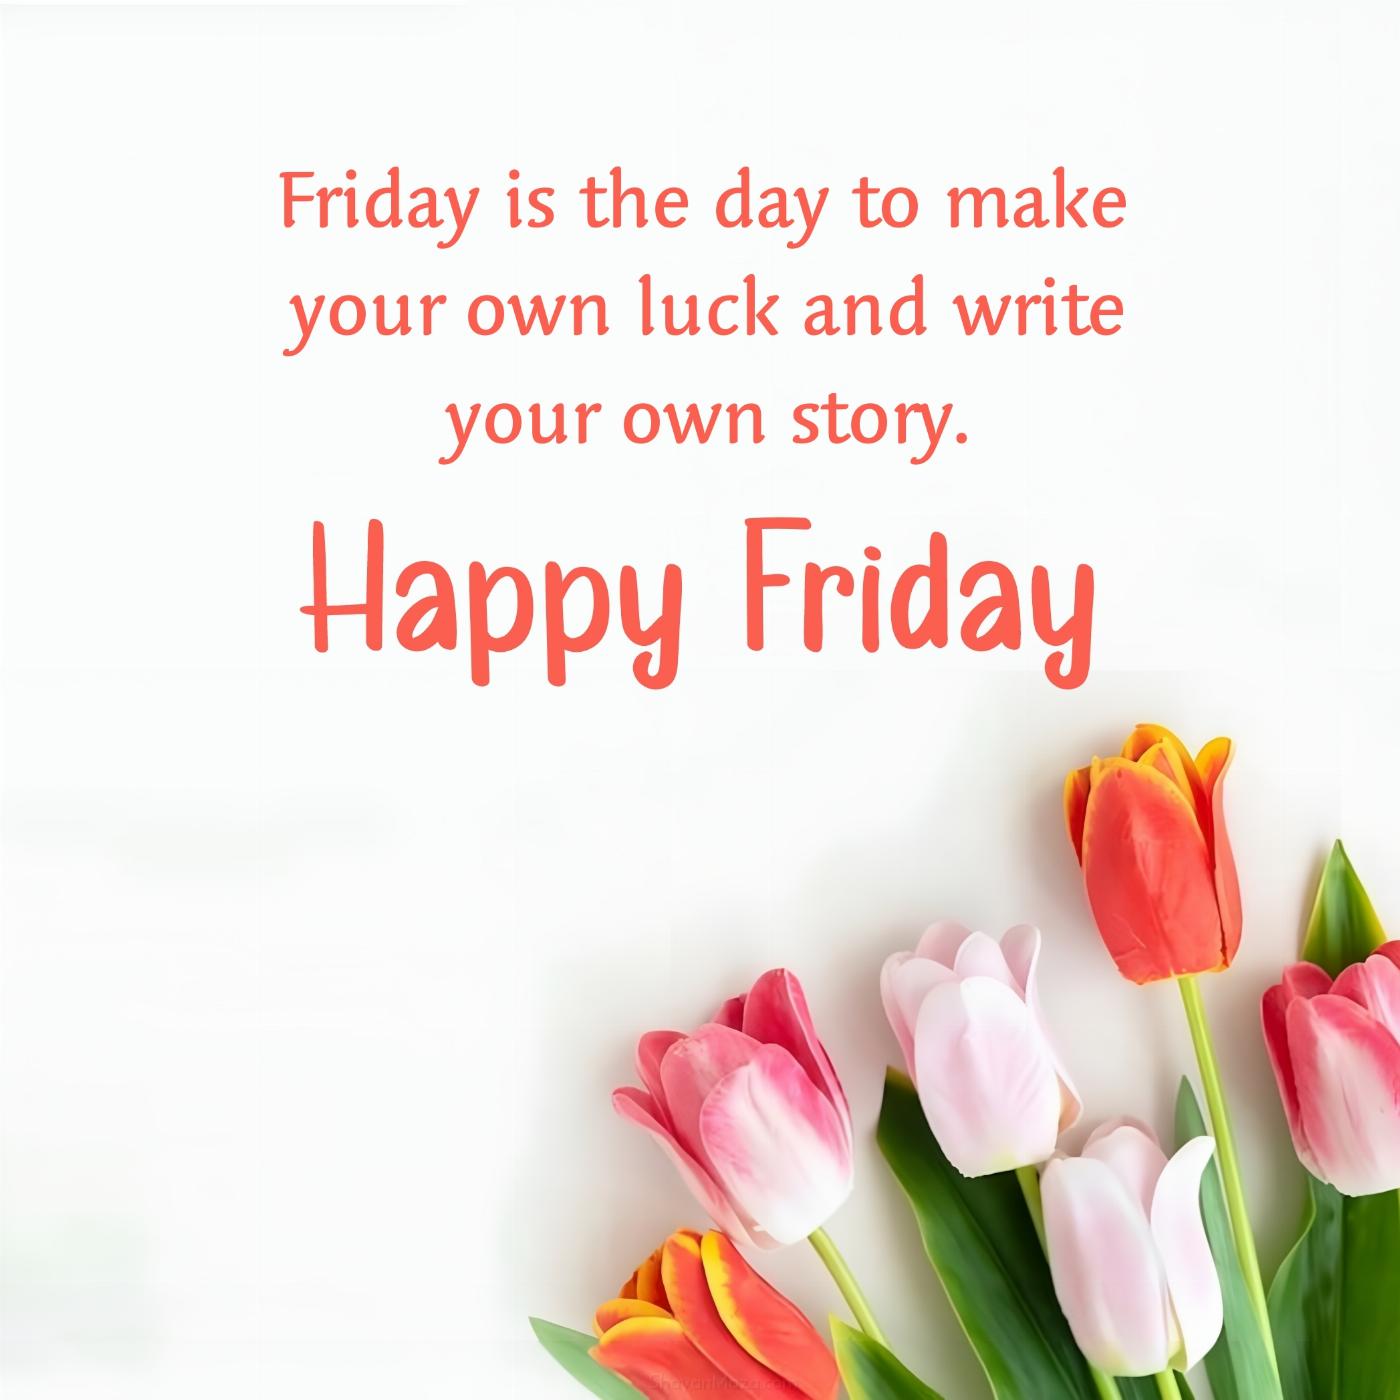 Friday is the day to make your own luck